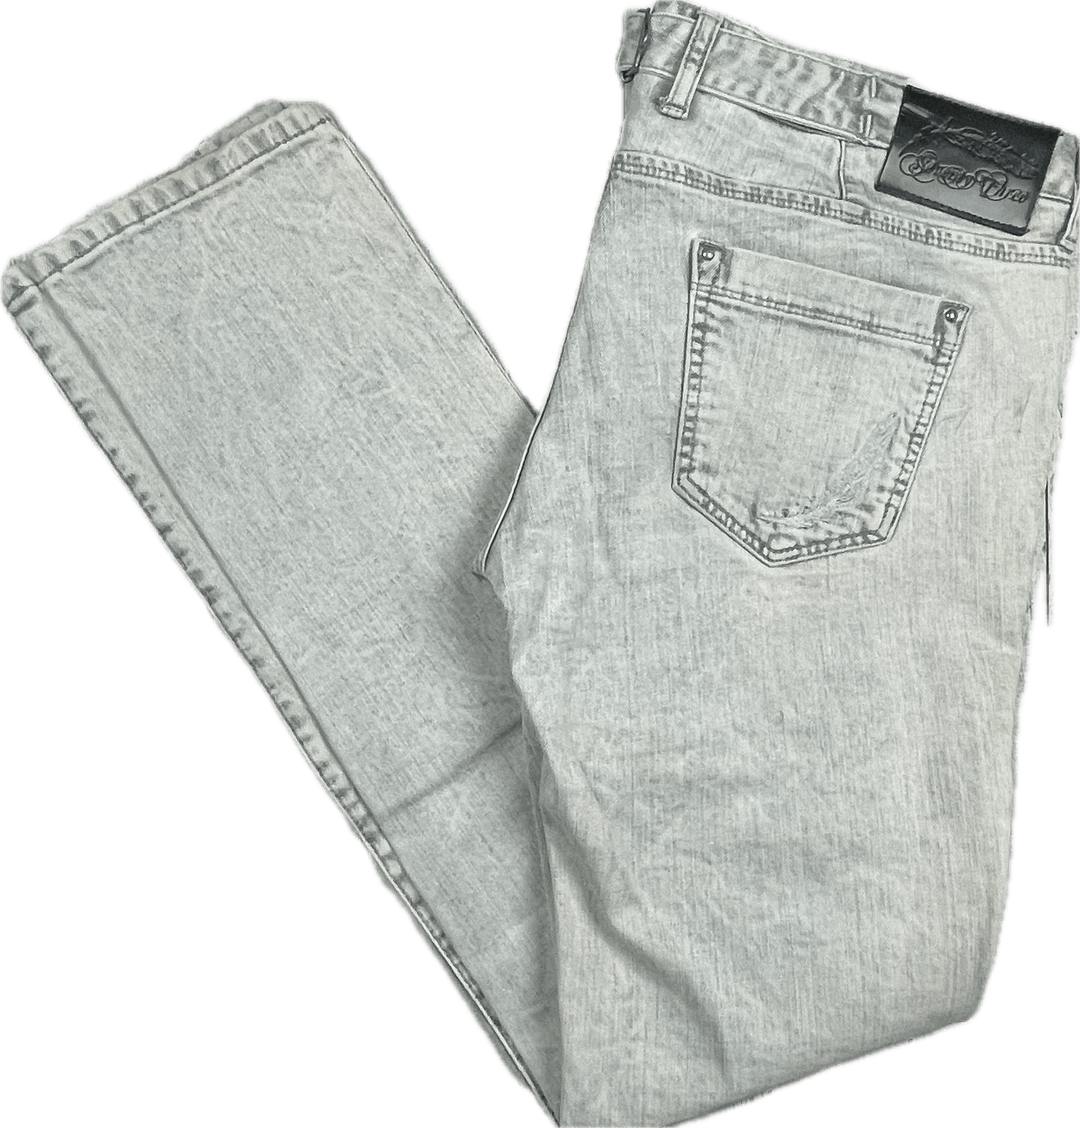 NEW -Pepe 'Rhythm' Ladies Low Rise Straight Jeans- Size 32/34 - Jean Pool